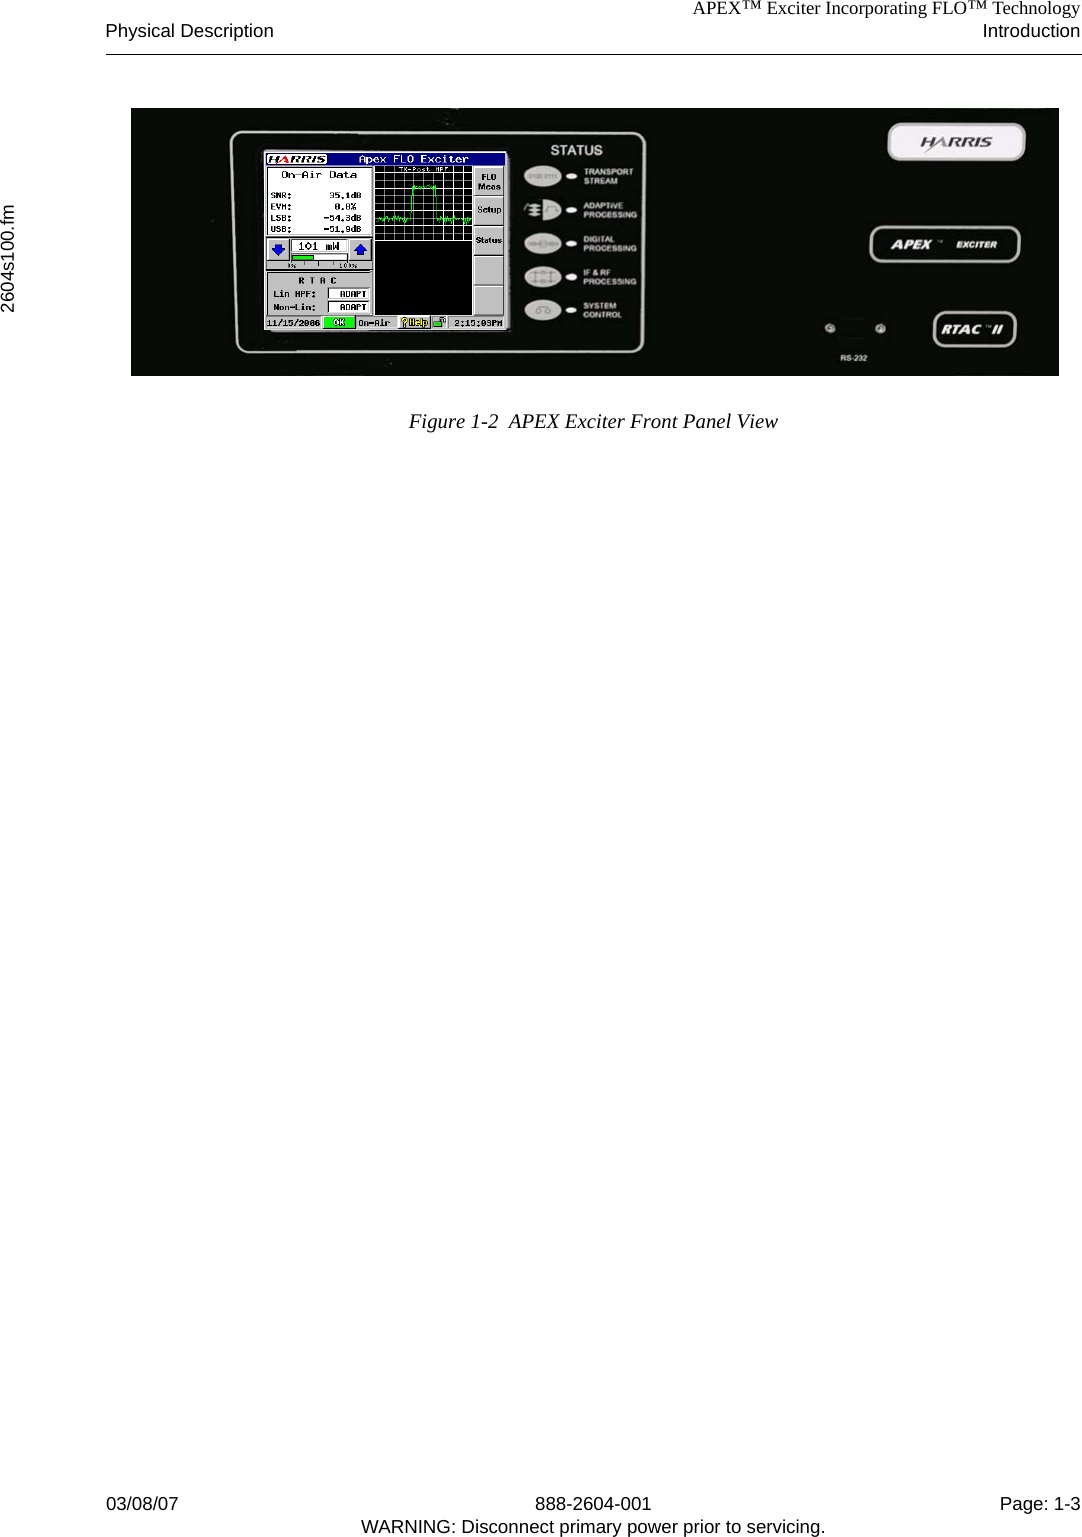 APEX™ Exciter Incorporating FLO™ TechnologyPhysical Description Introduction2604s100.fm03/08/07 888-2604-001 Page: 1-3WARNING: Disconnect primary power prior to servicing.Figure 1-2  APEX Exciter Front Panel View